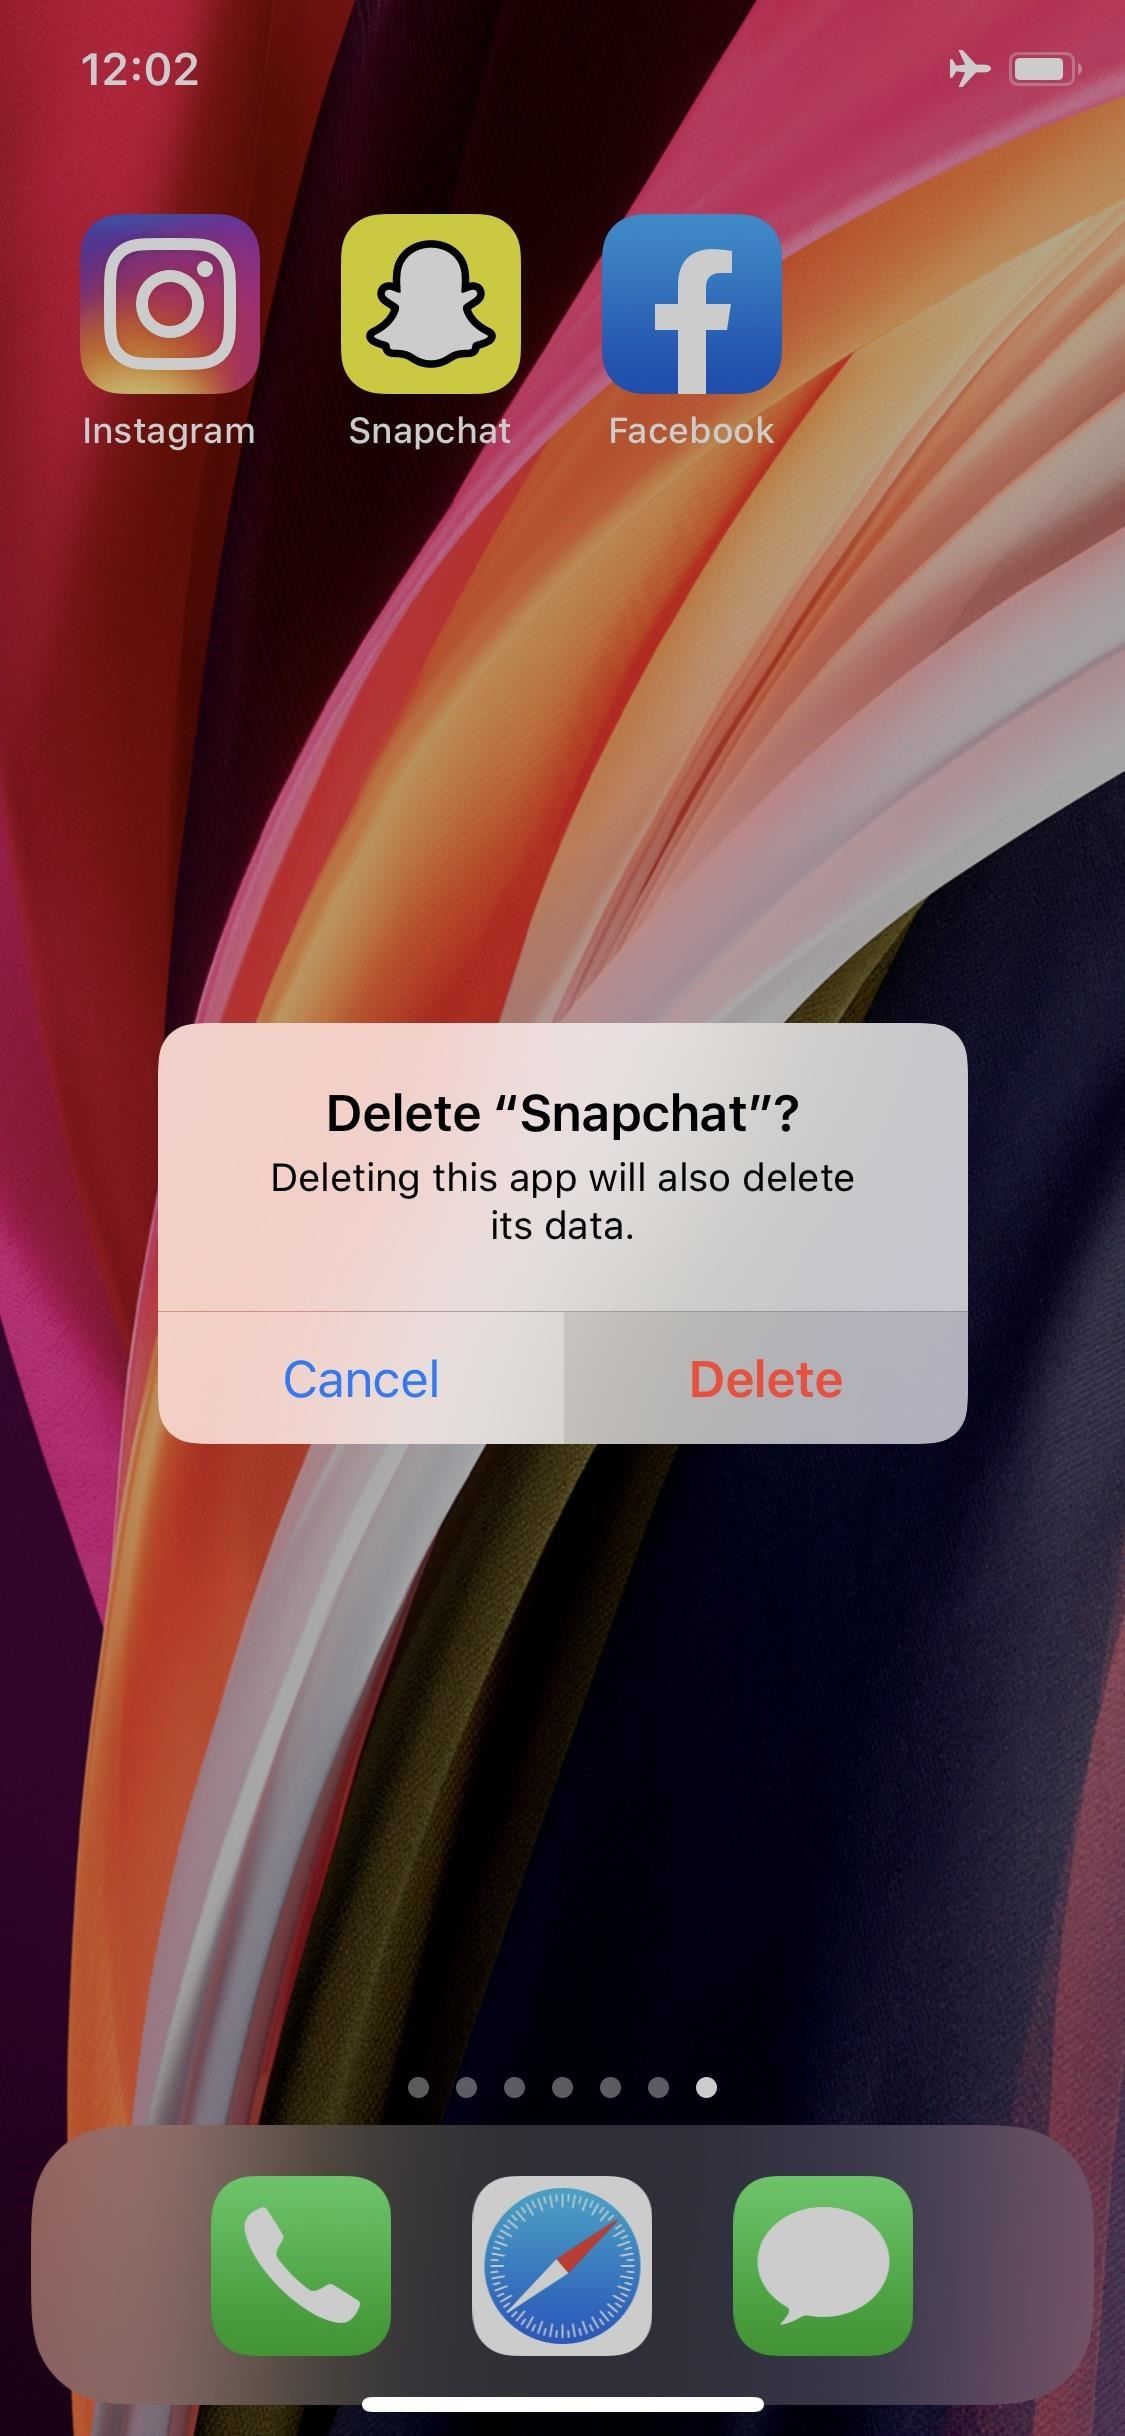 How to Save Snapchats Without Getting Caught on Your iPhone — No Jailbreak Required